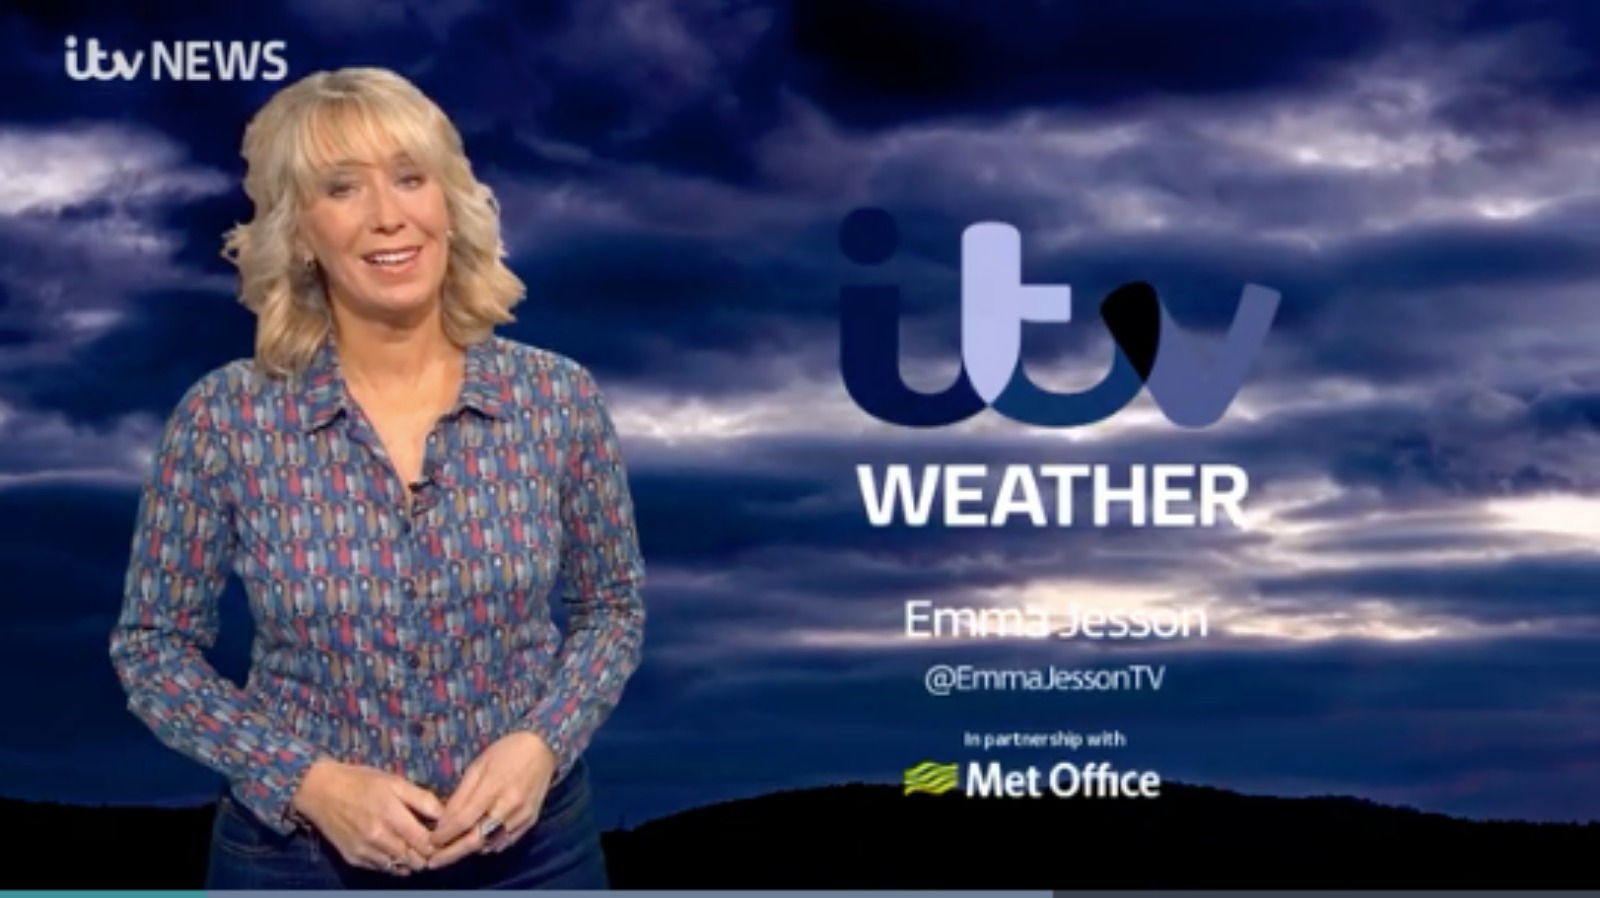 UK weather forecast. Calendar weather. Showers easing to leave a dry